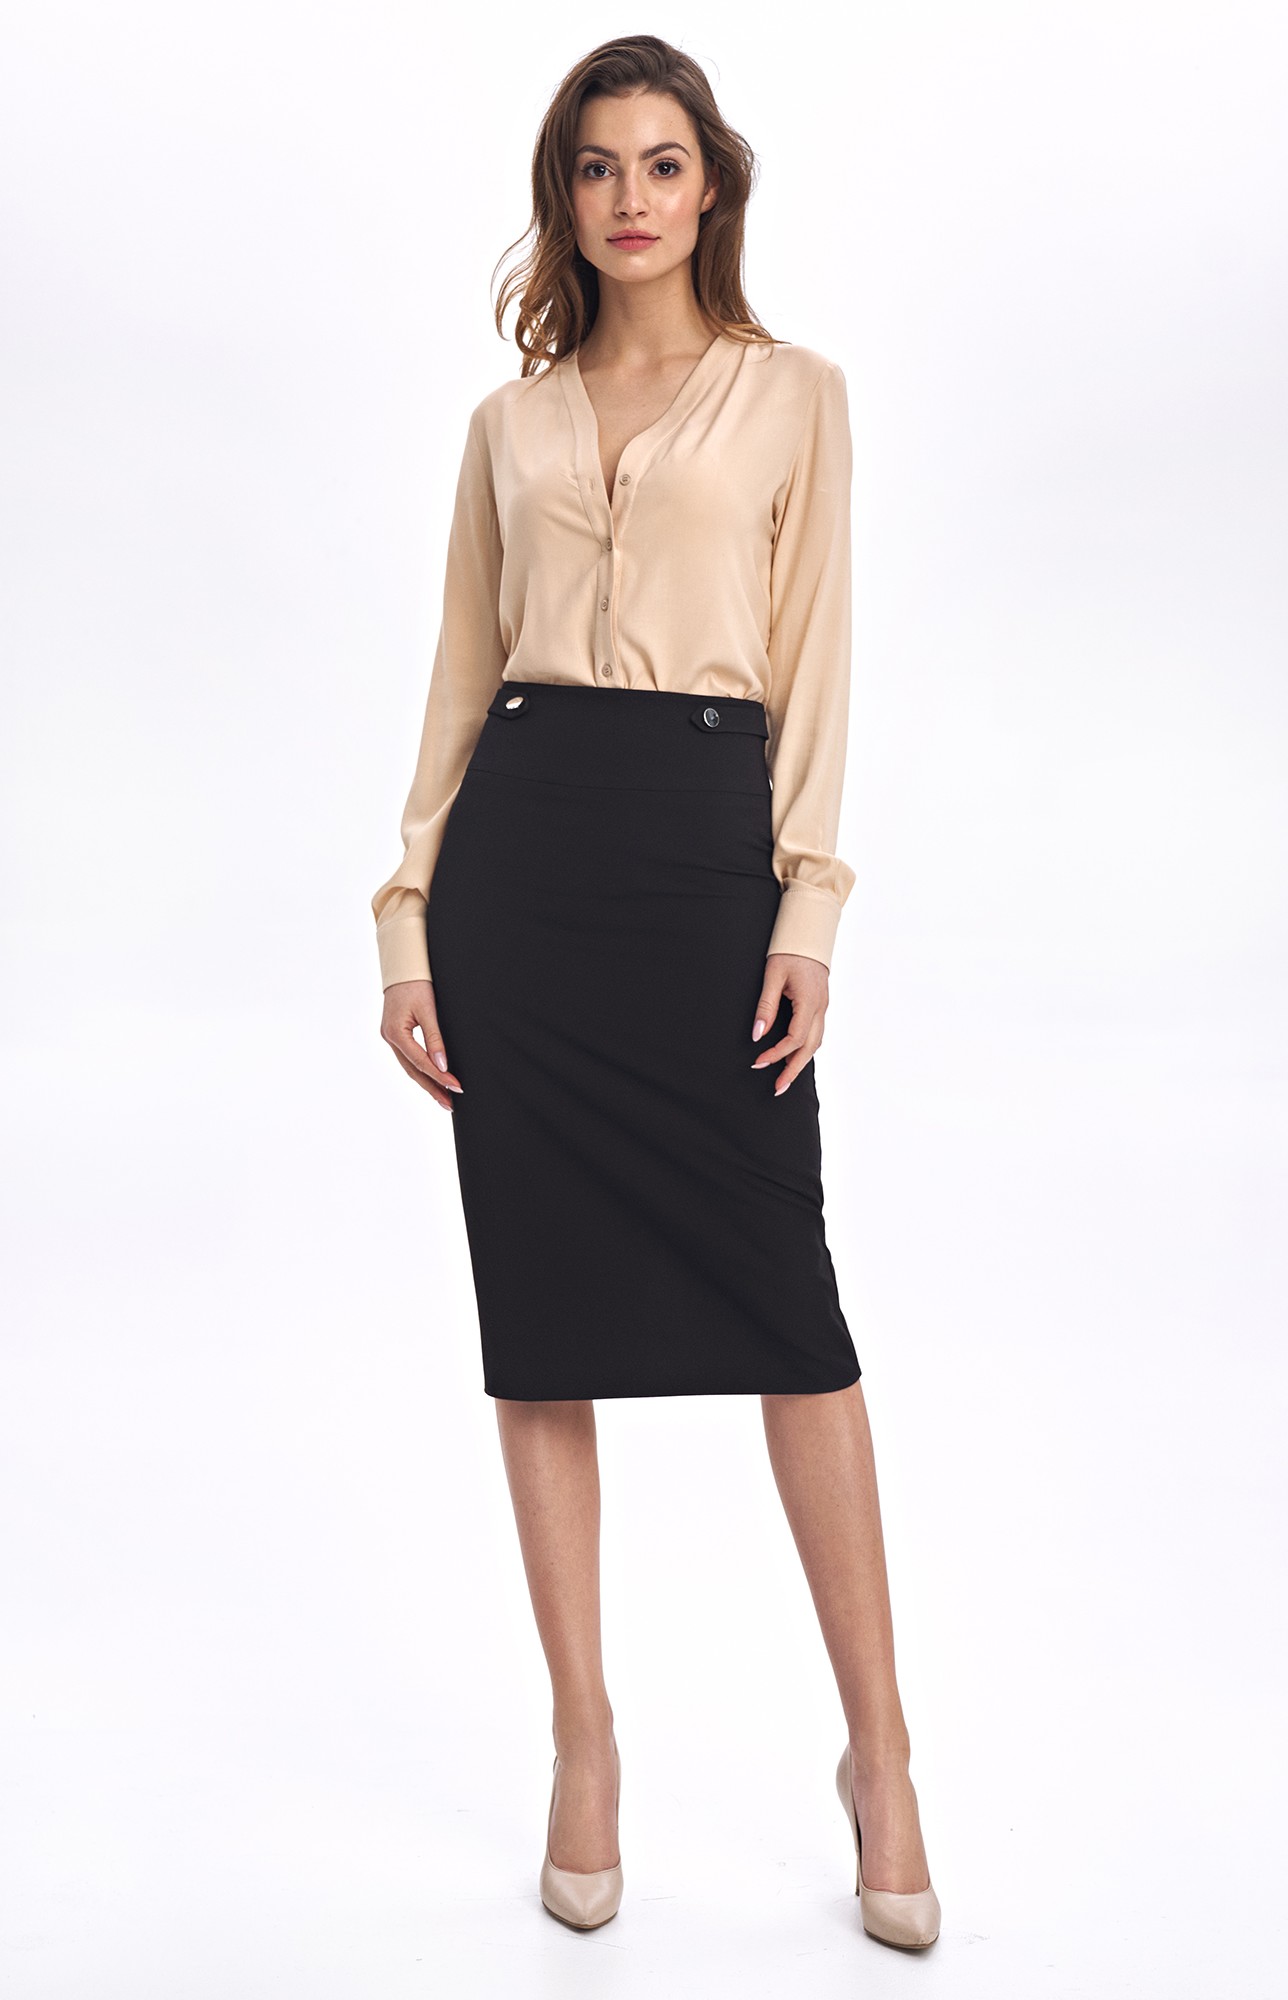 Office Black Pencil Skirt Colett Csp14n Idresstocode Online Boutique Of Negligee And